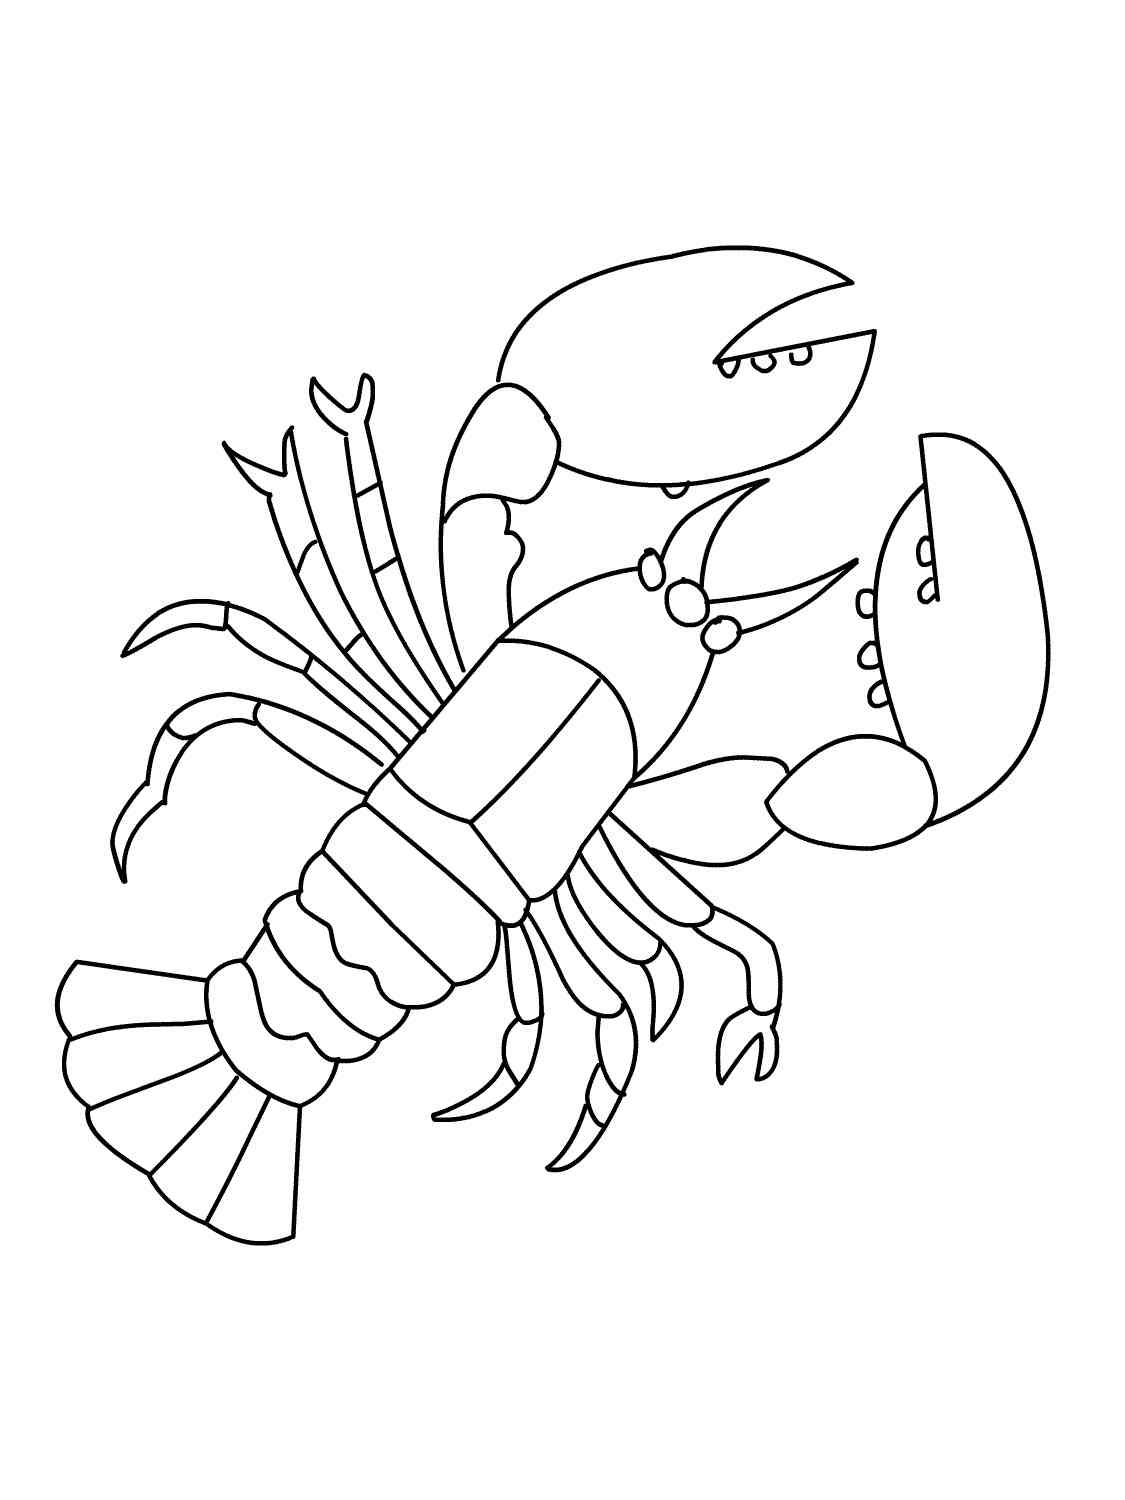 Simple Lobster coloring page